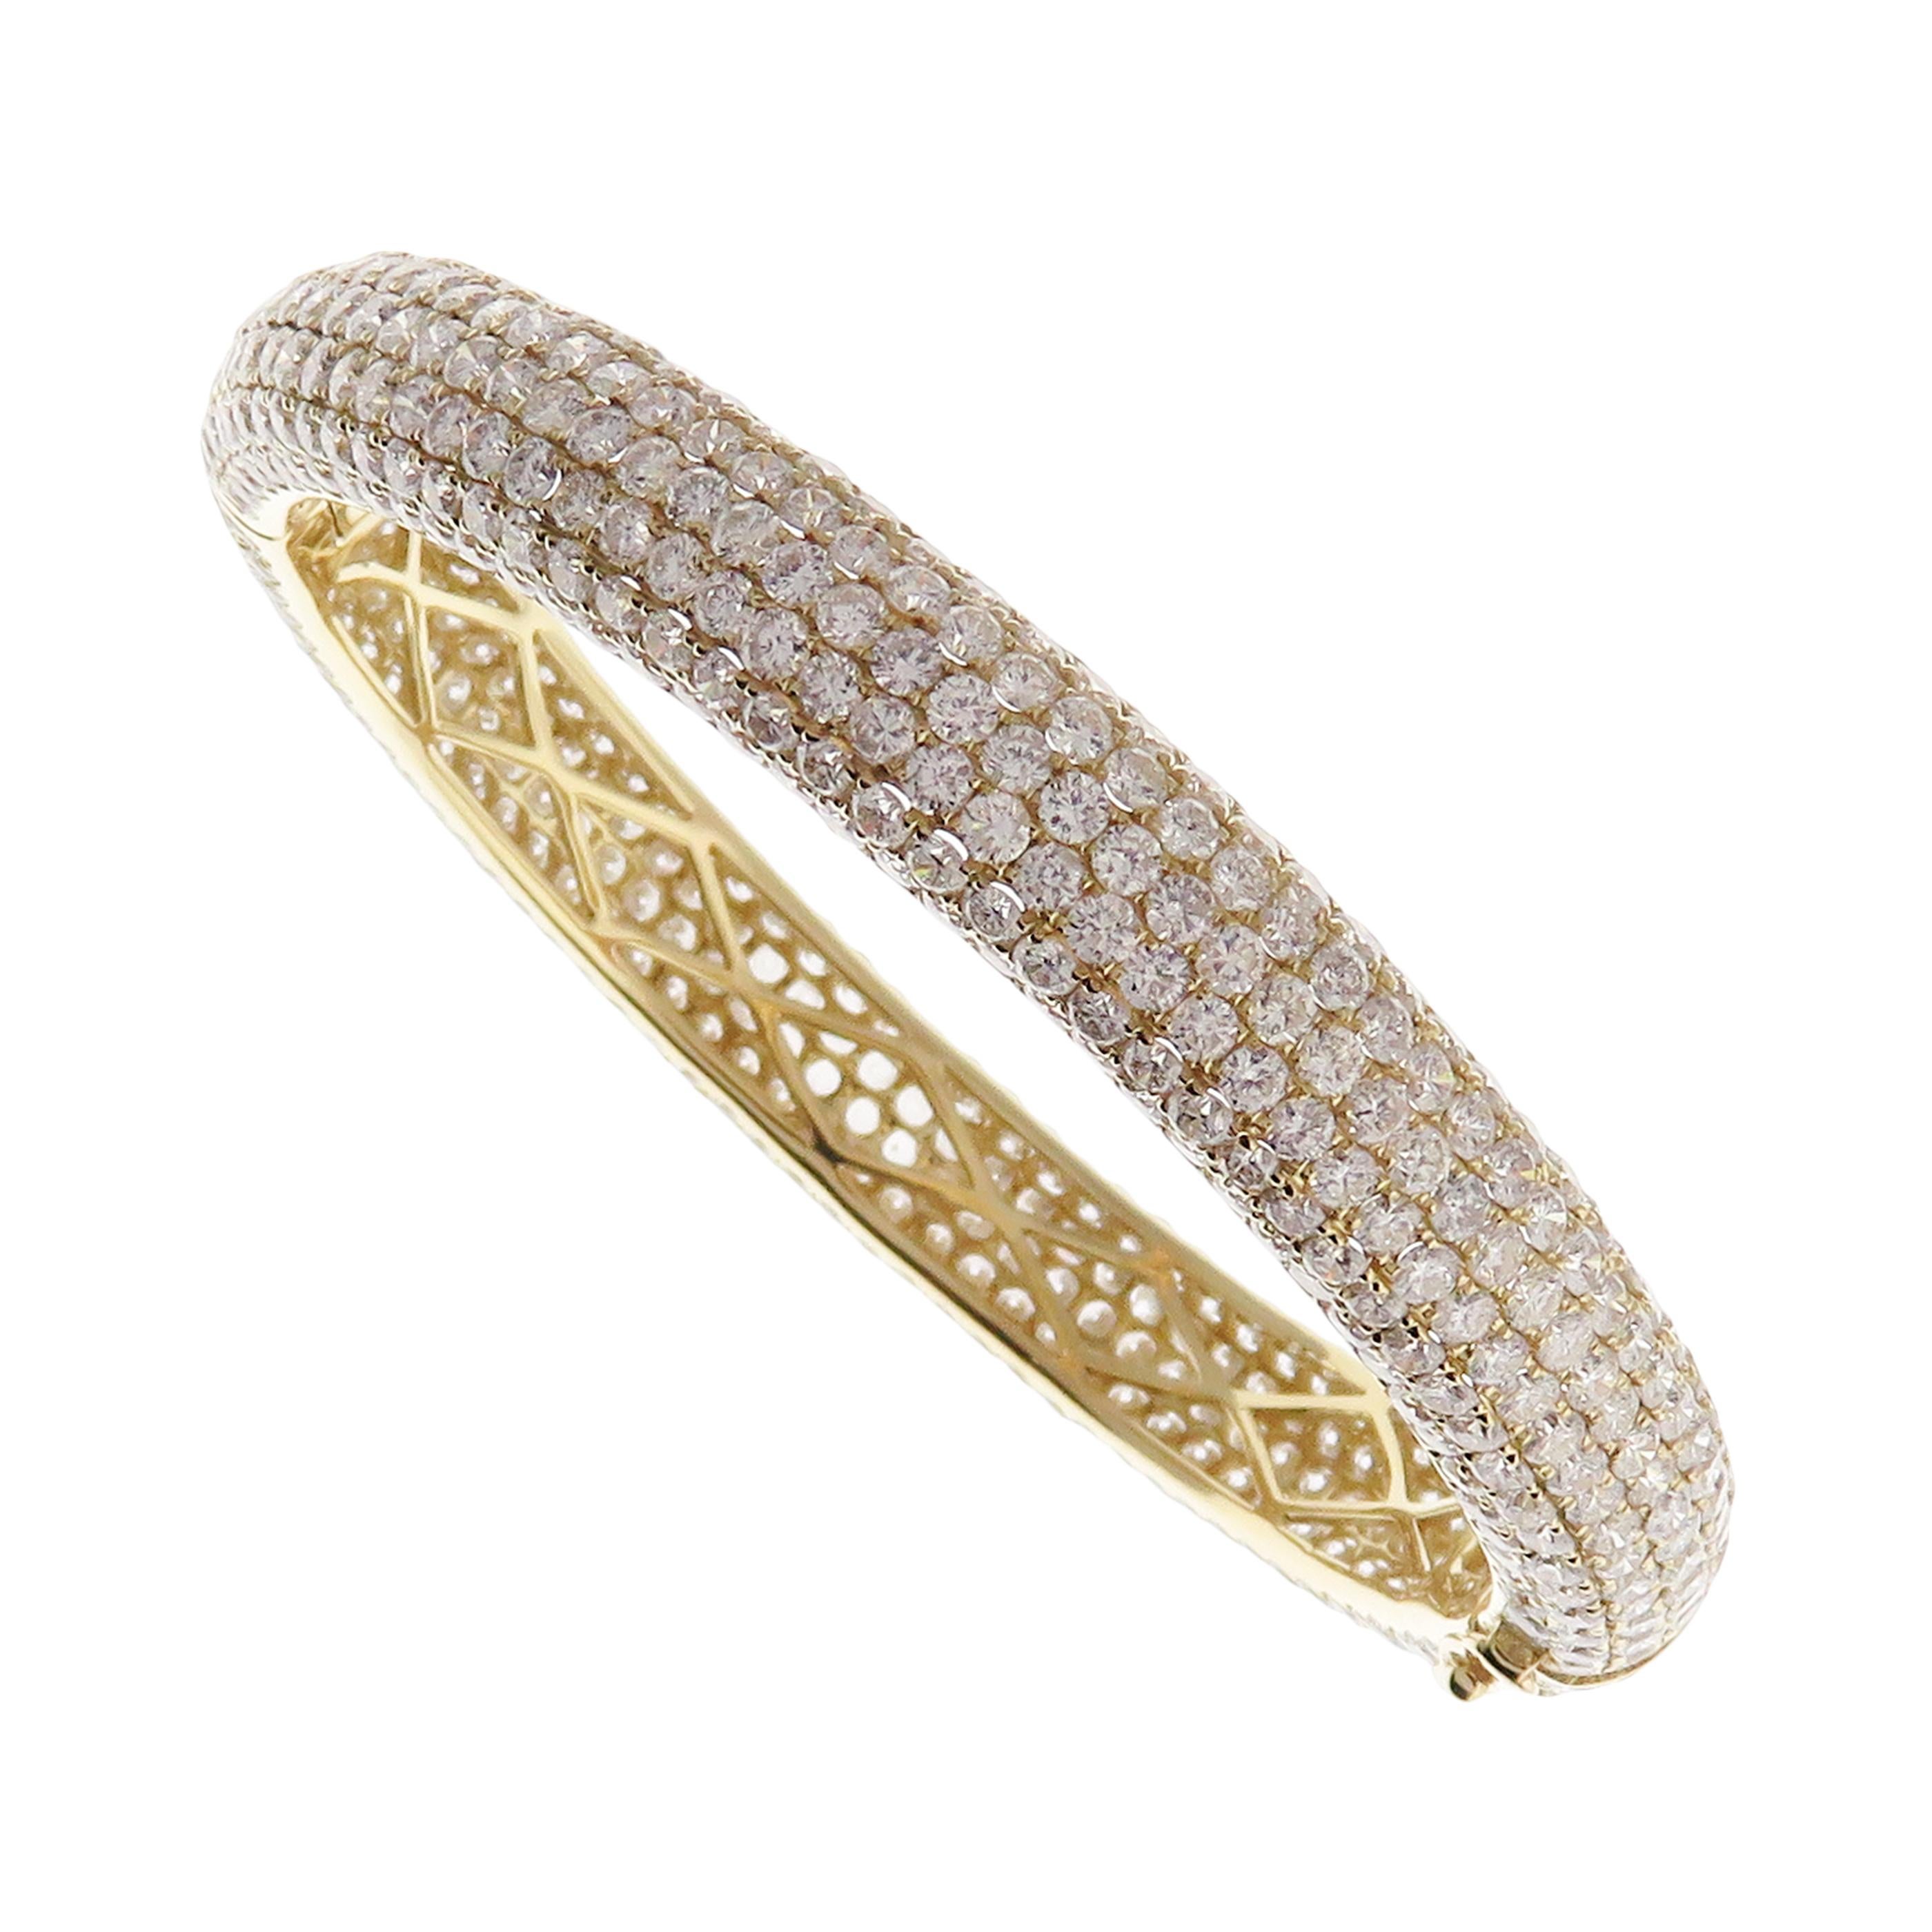 This classic pave bangle is crafted in 18-karat yellow gold, weighing approximately 20.05 total carats of V-Quality white diamonds. This bangle has diamond all around for a 